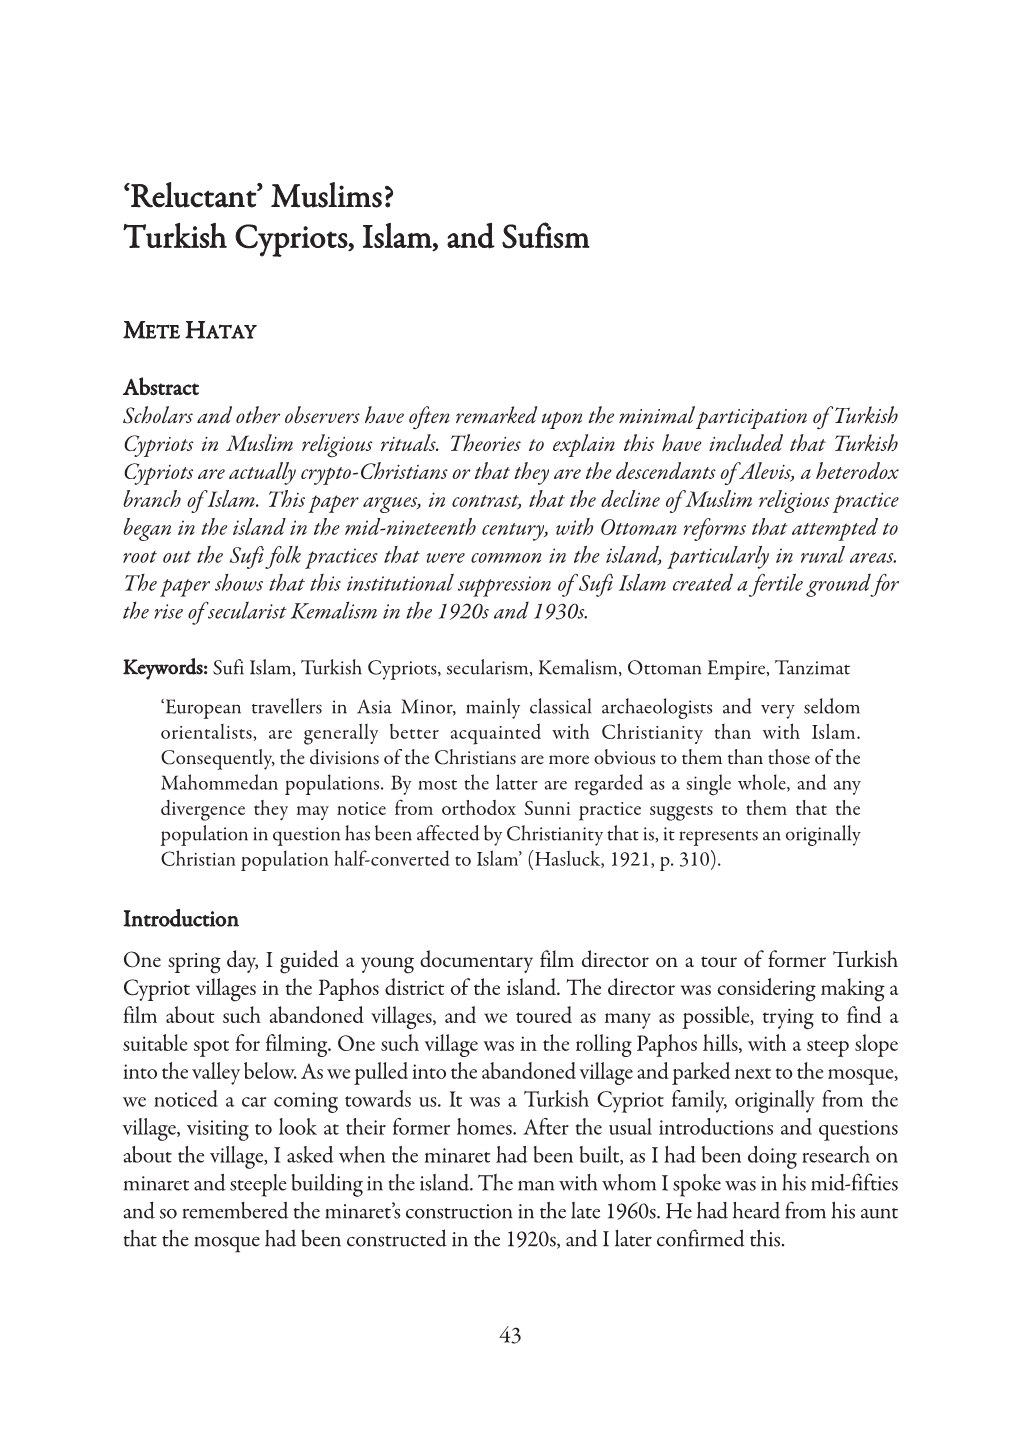 'Reluctant' Muslims? Turkish Cypriots, Islam, and Sufism